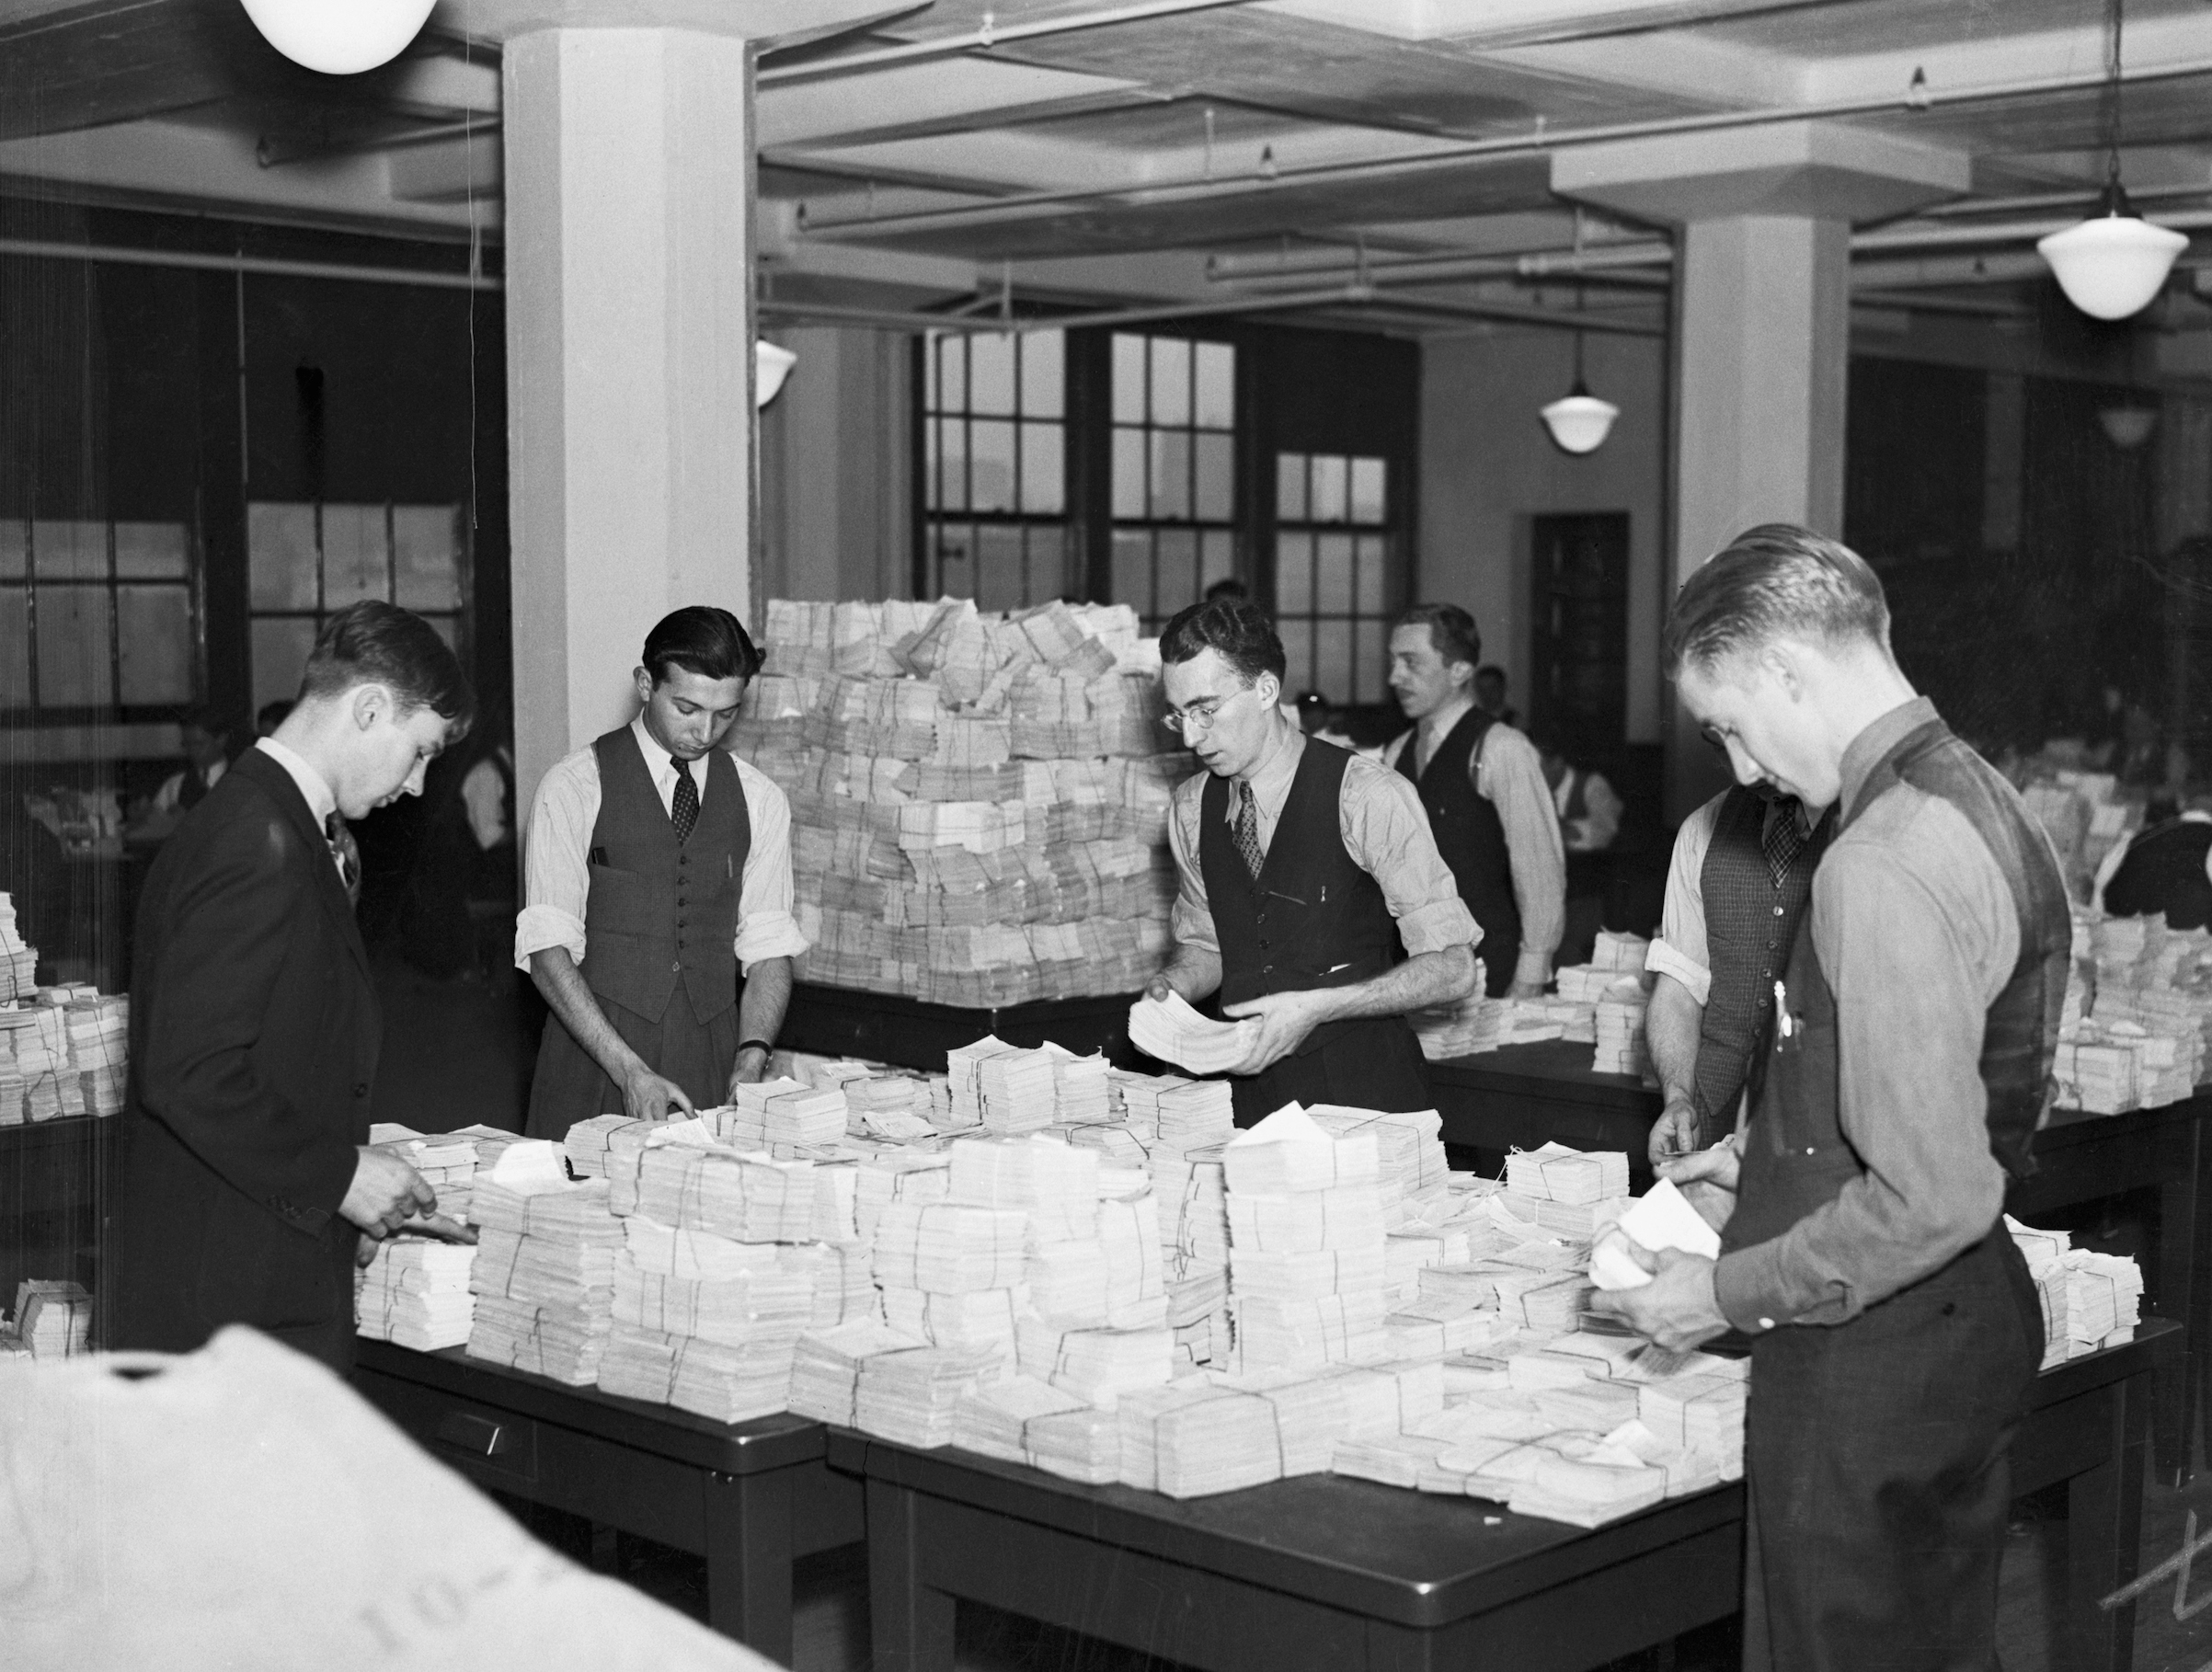 Employees at work establishing individual social security accounts for millions of workers at the wage records office in 1936 (Bettmann/Getty Images)